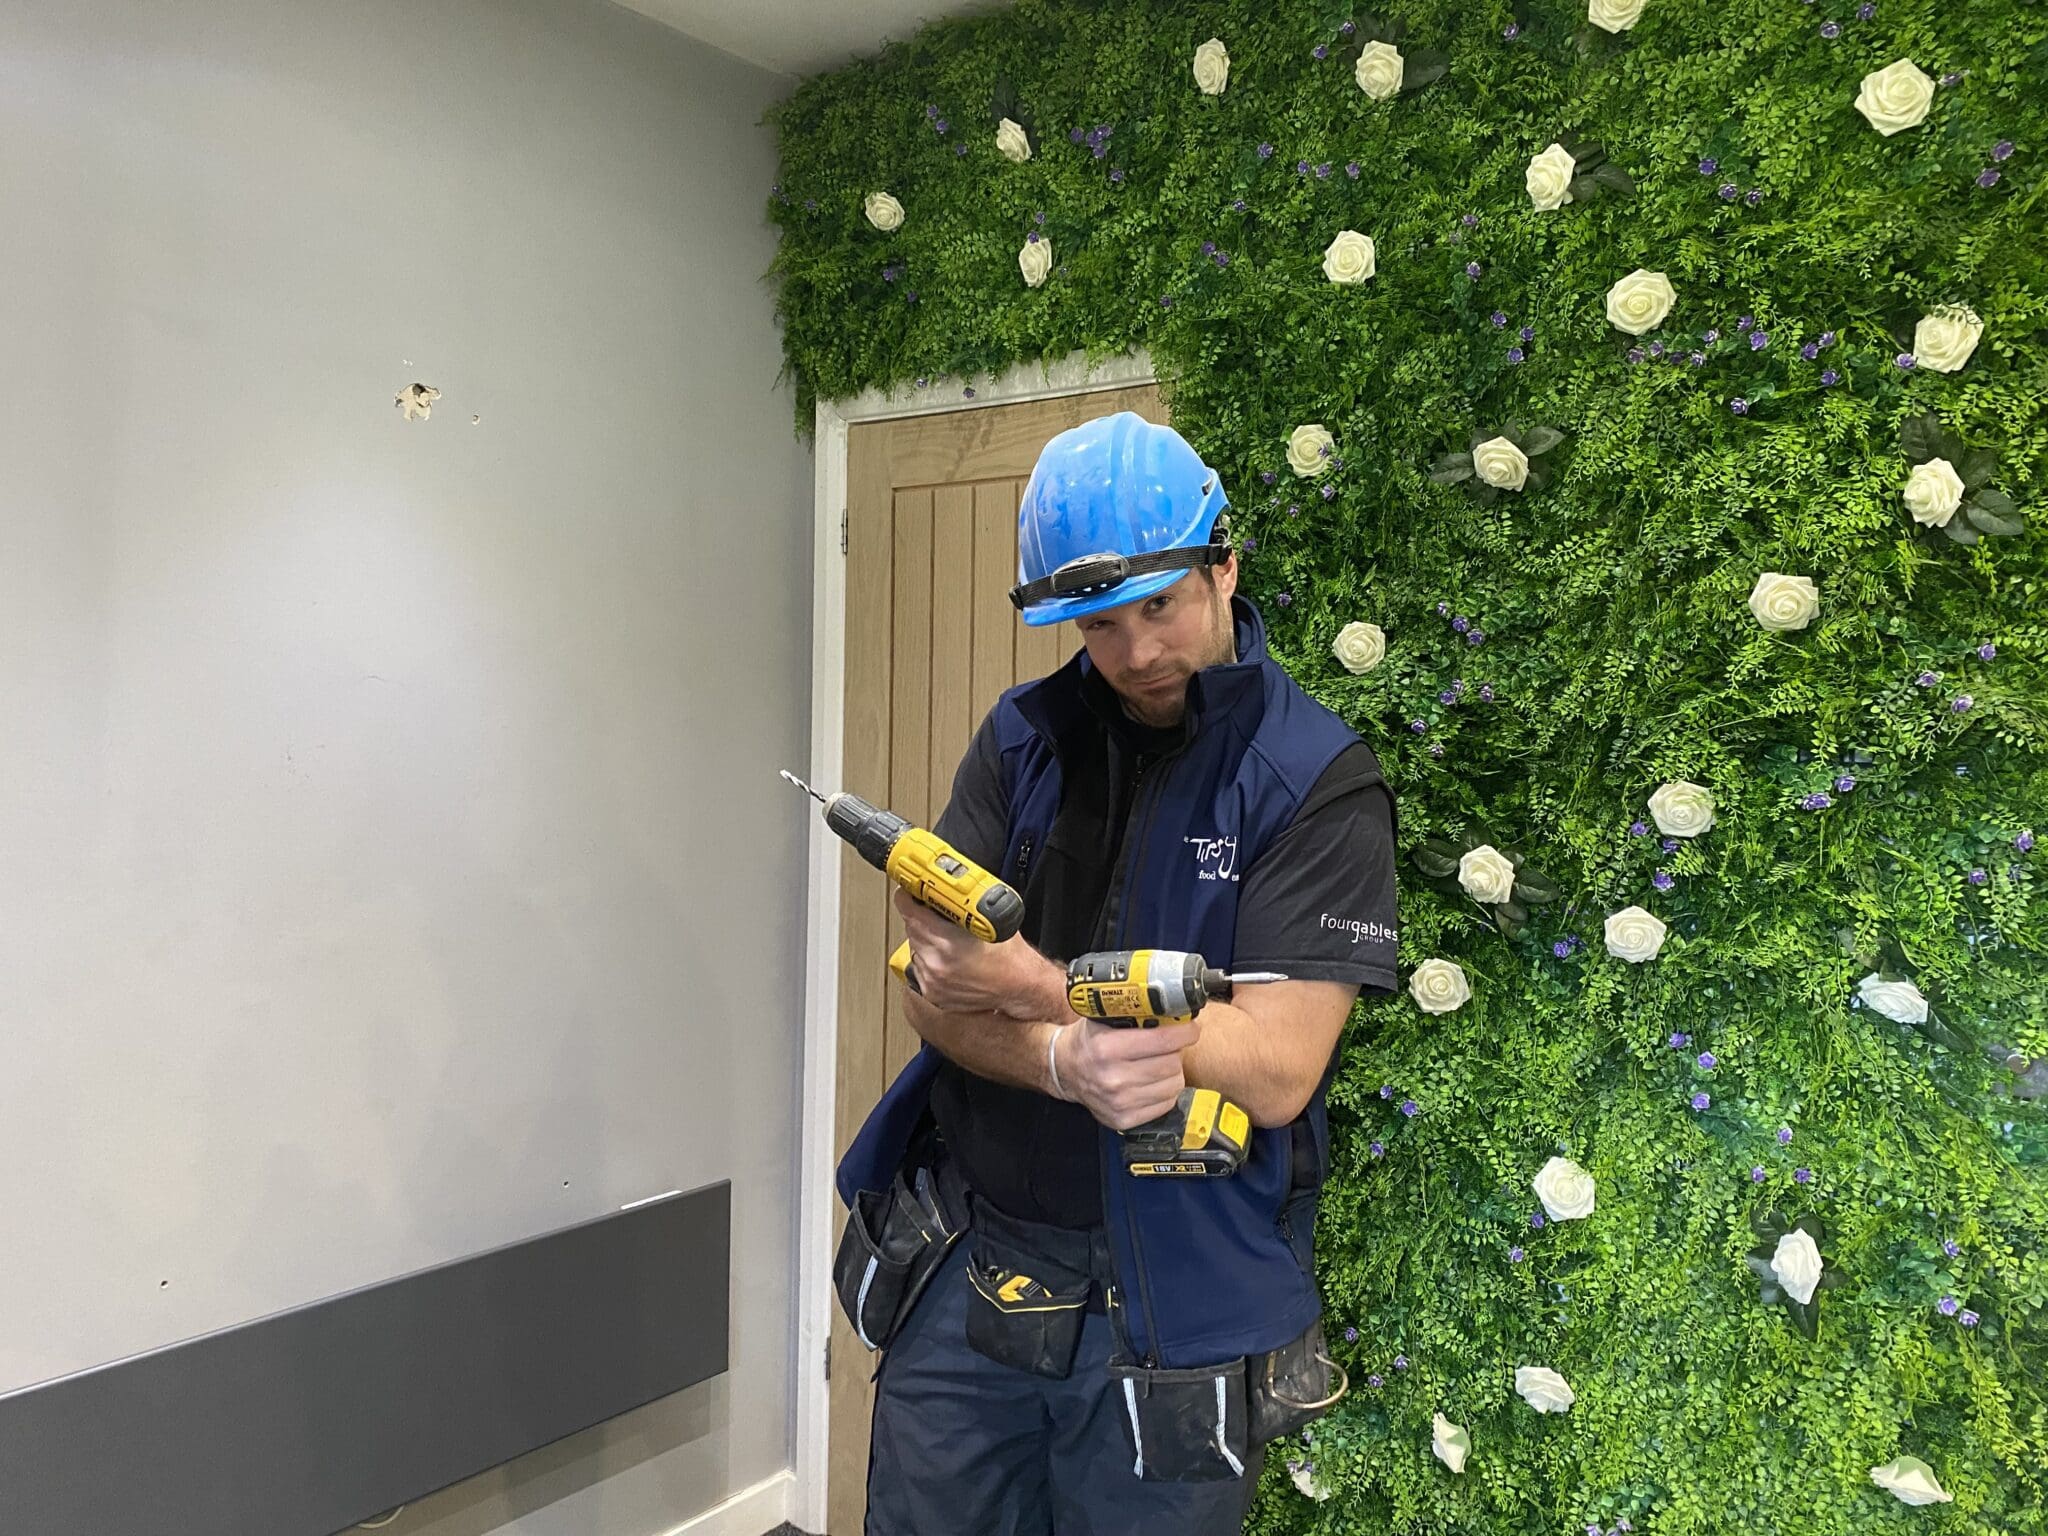 A man is holding a drill in front of a green wall.